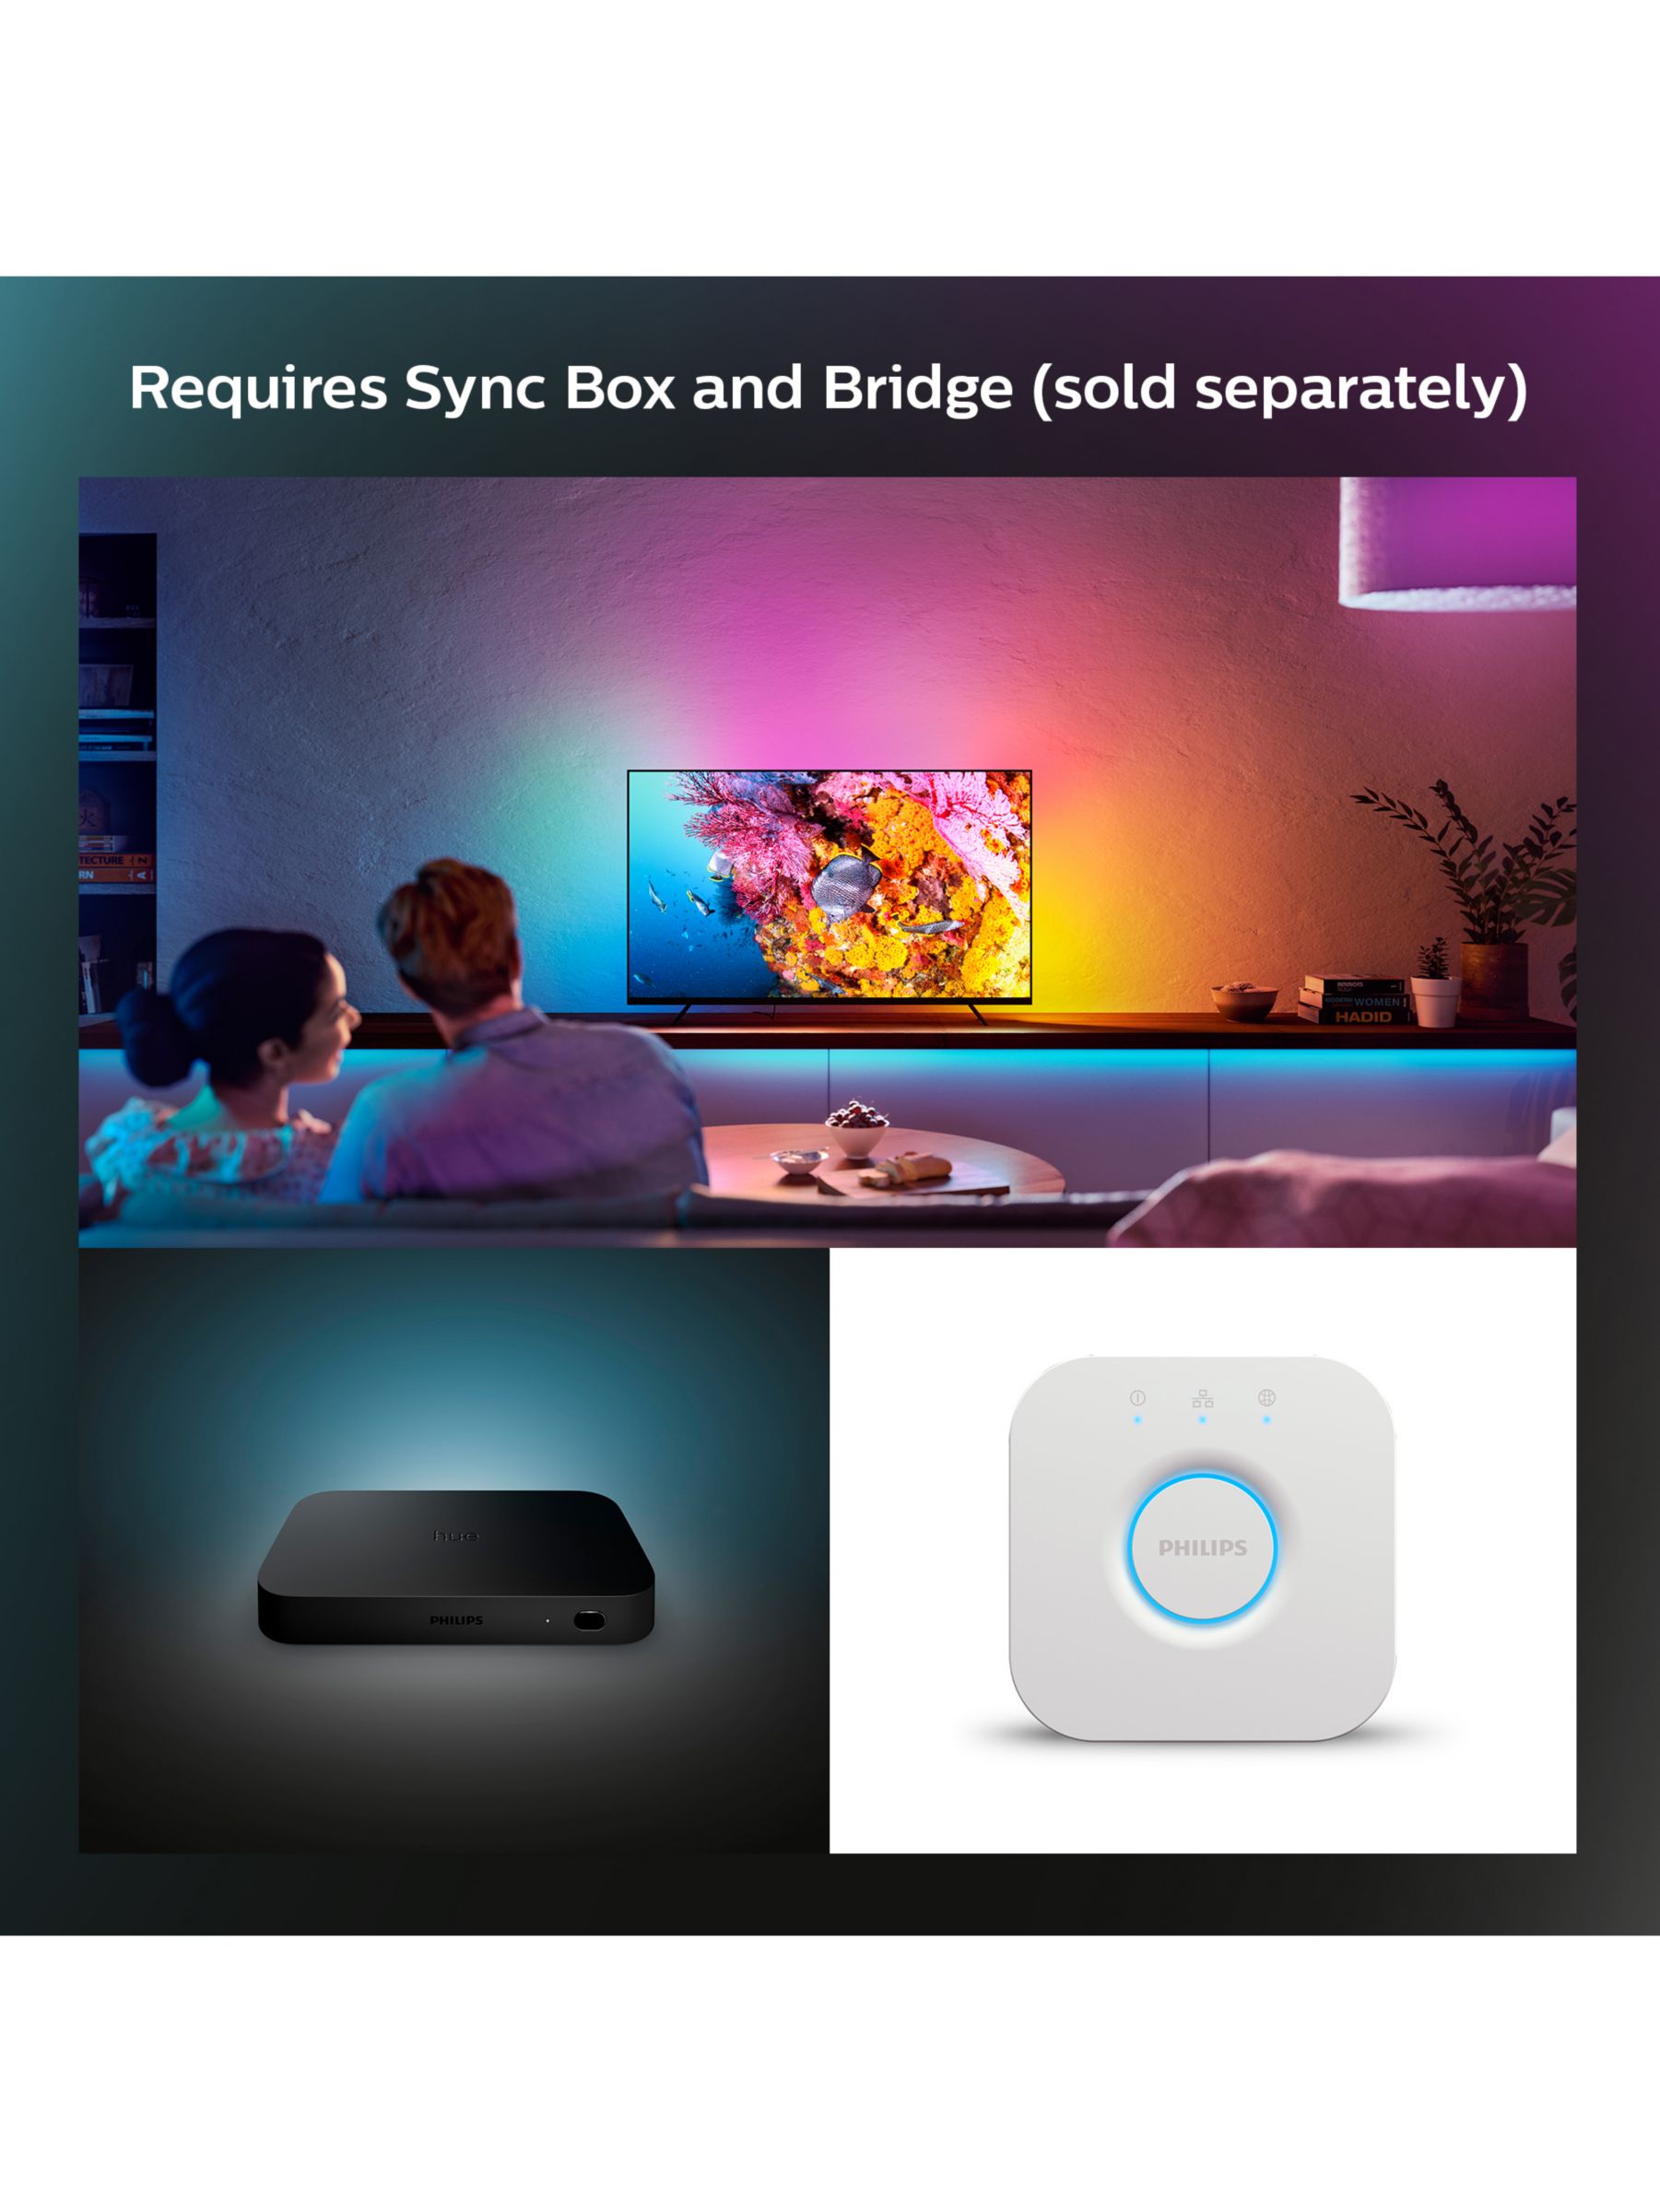  Philips Hue Compact Smart Light Tube, Black - White and Color  Ambiance LED Color-Changing Light - 1 Pack - Sync with TV, Music, and  Gaming - Requires Bridge and Sync Box 